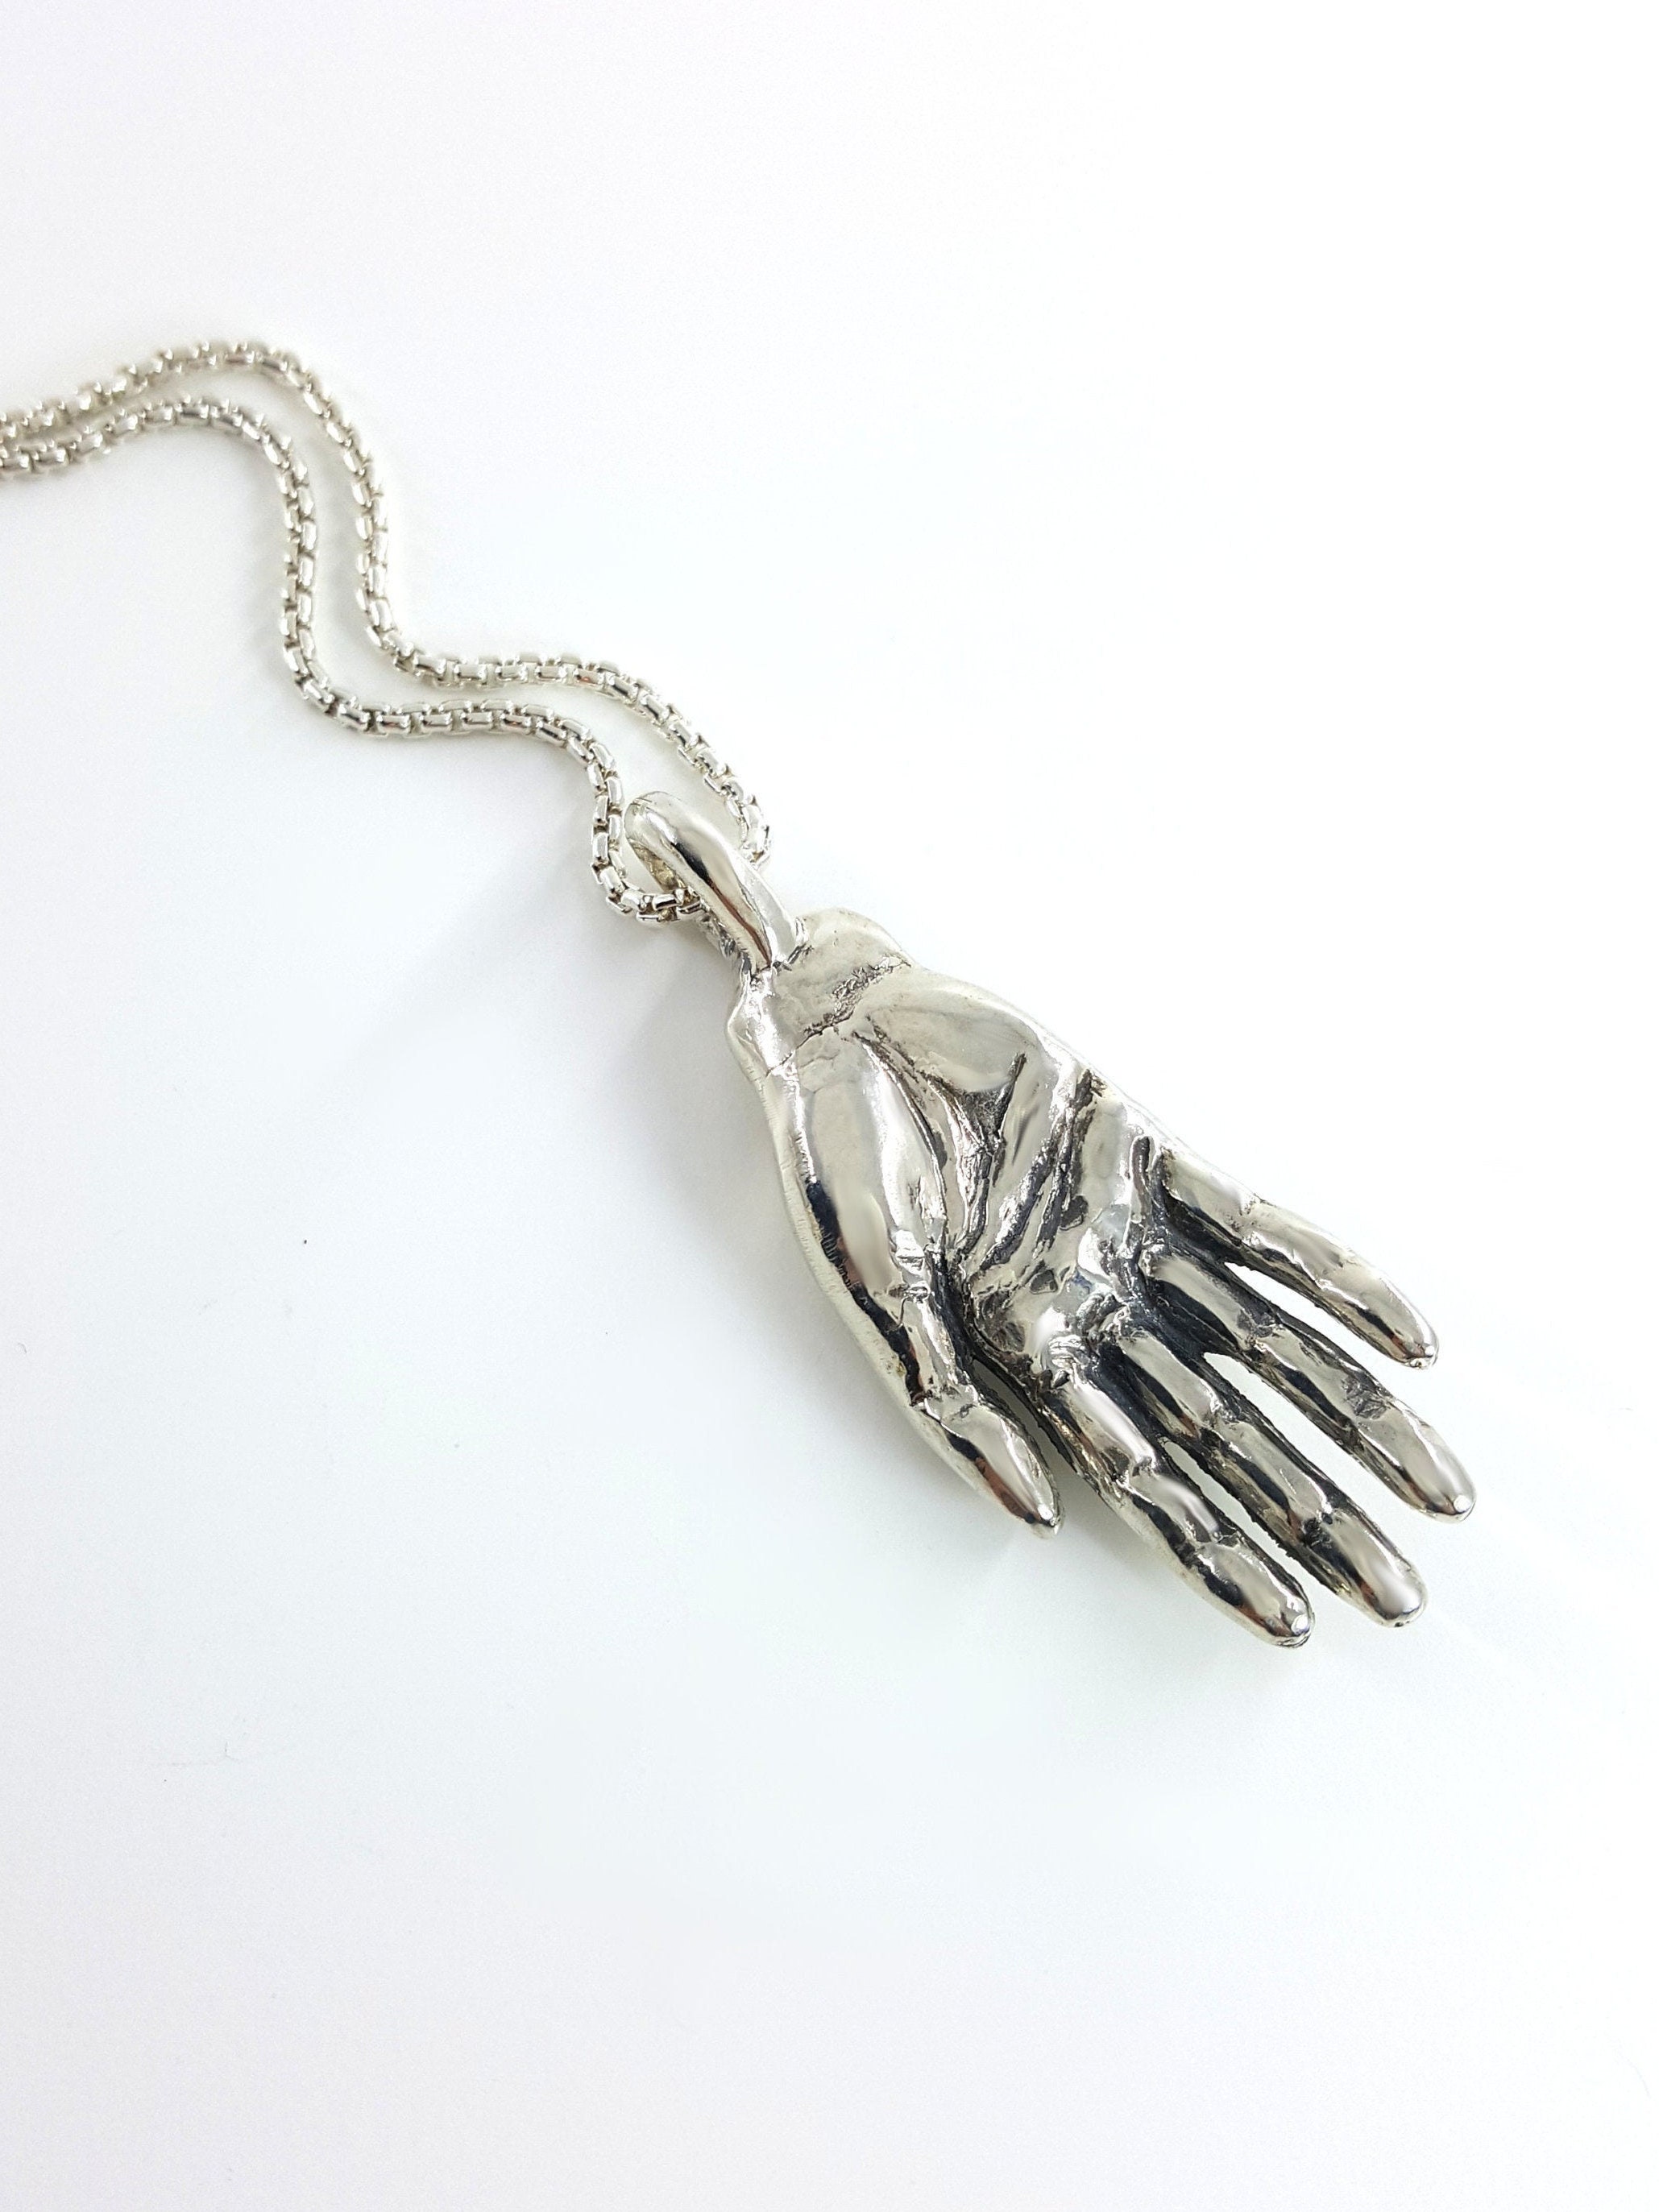 Large Hand Necklace in Sterling Silver, Silver Hand Pendant, Right Hand  Charm, Silver Hamsa Necklace, Unique Silver Statement Jewelry -  India